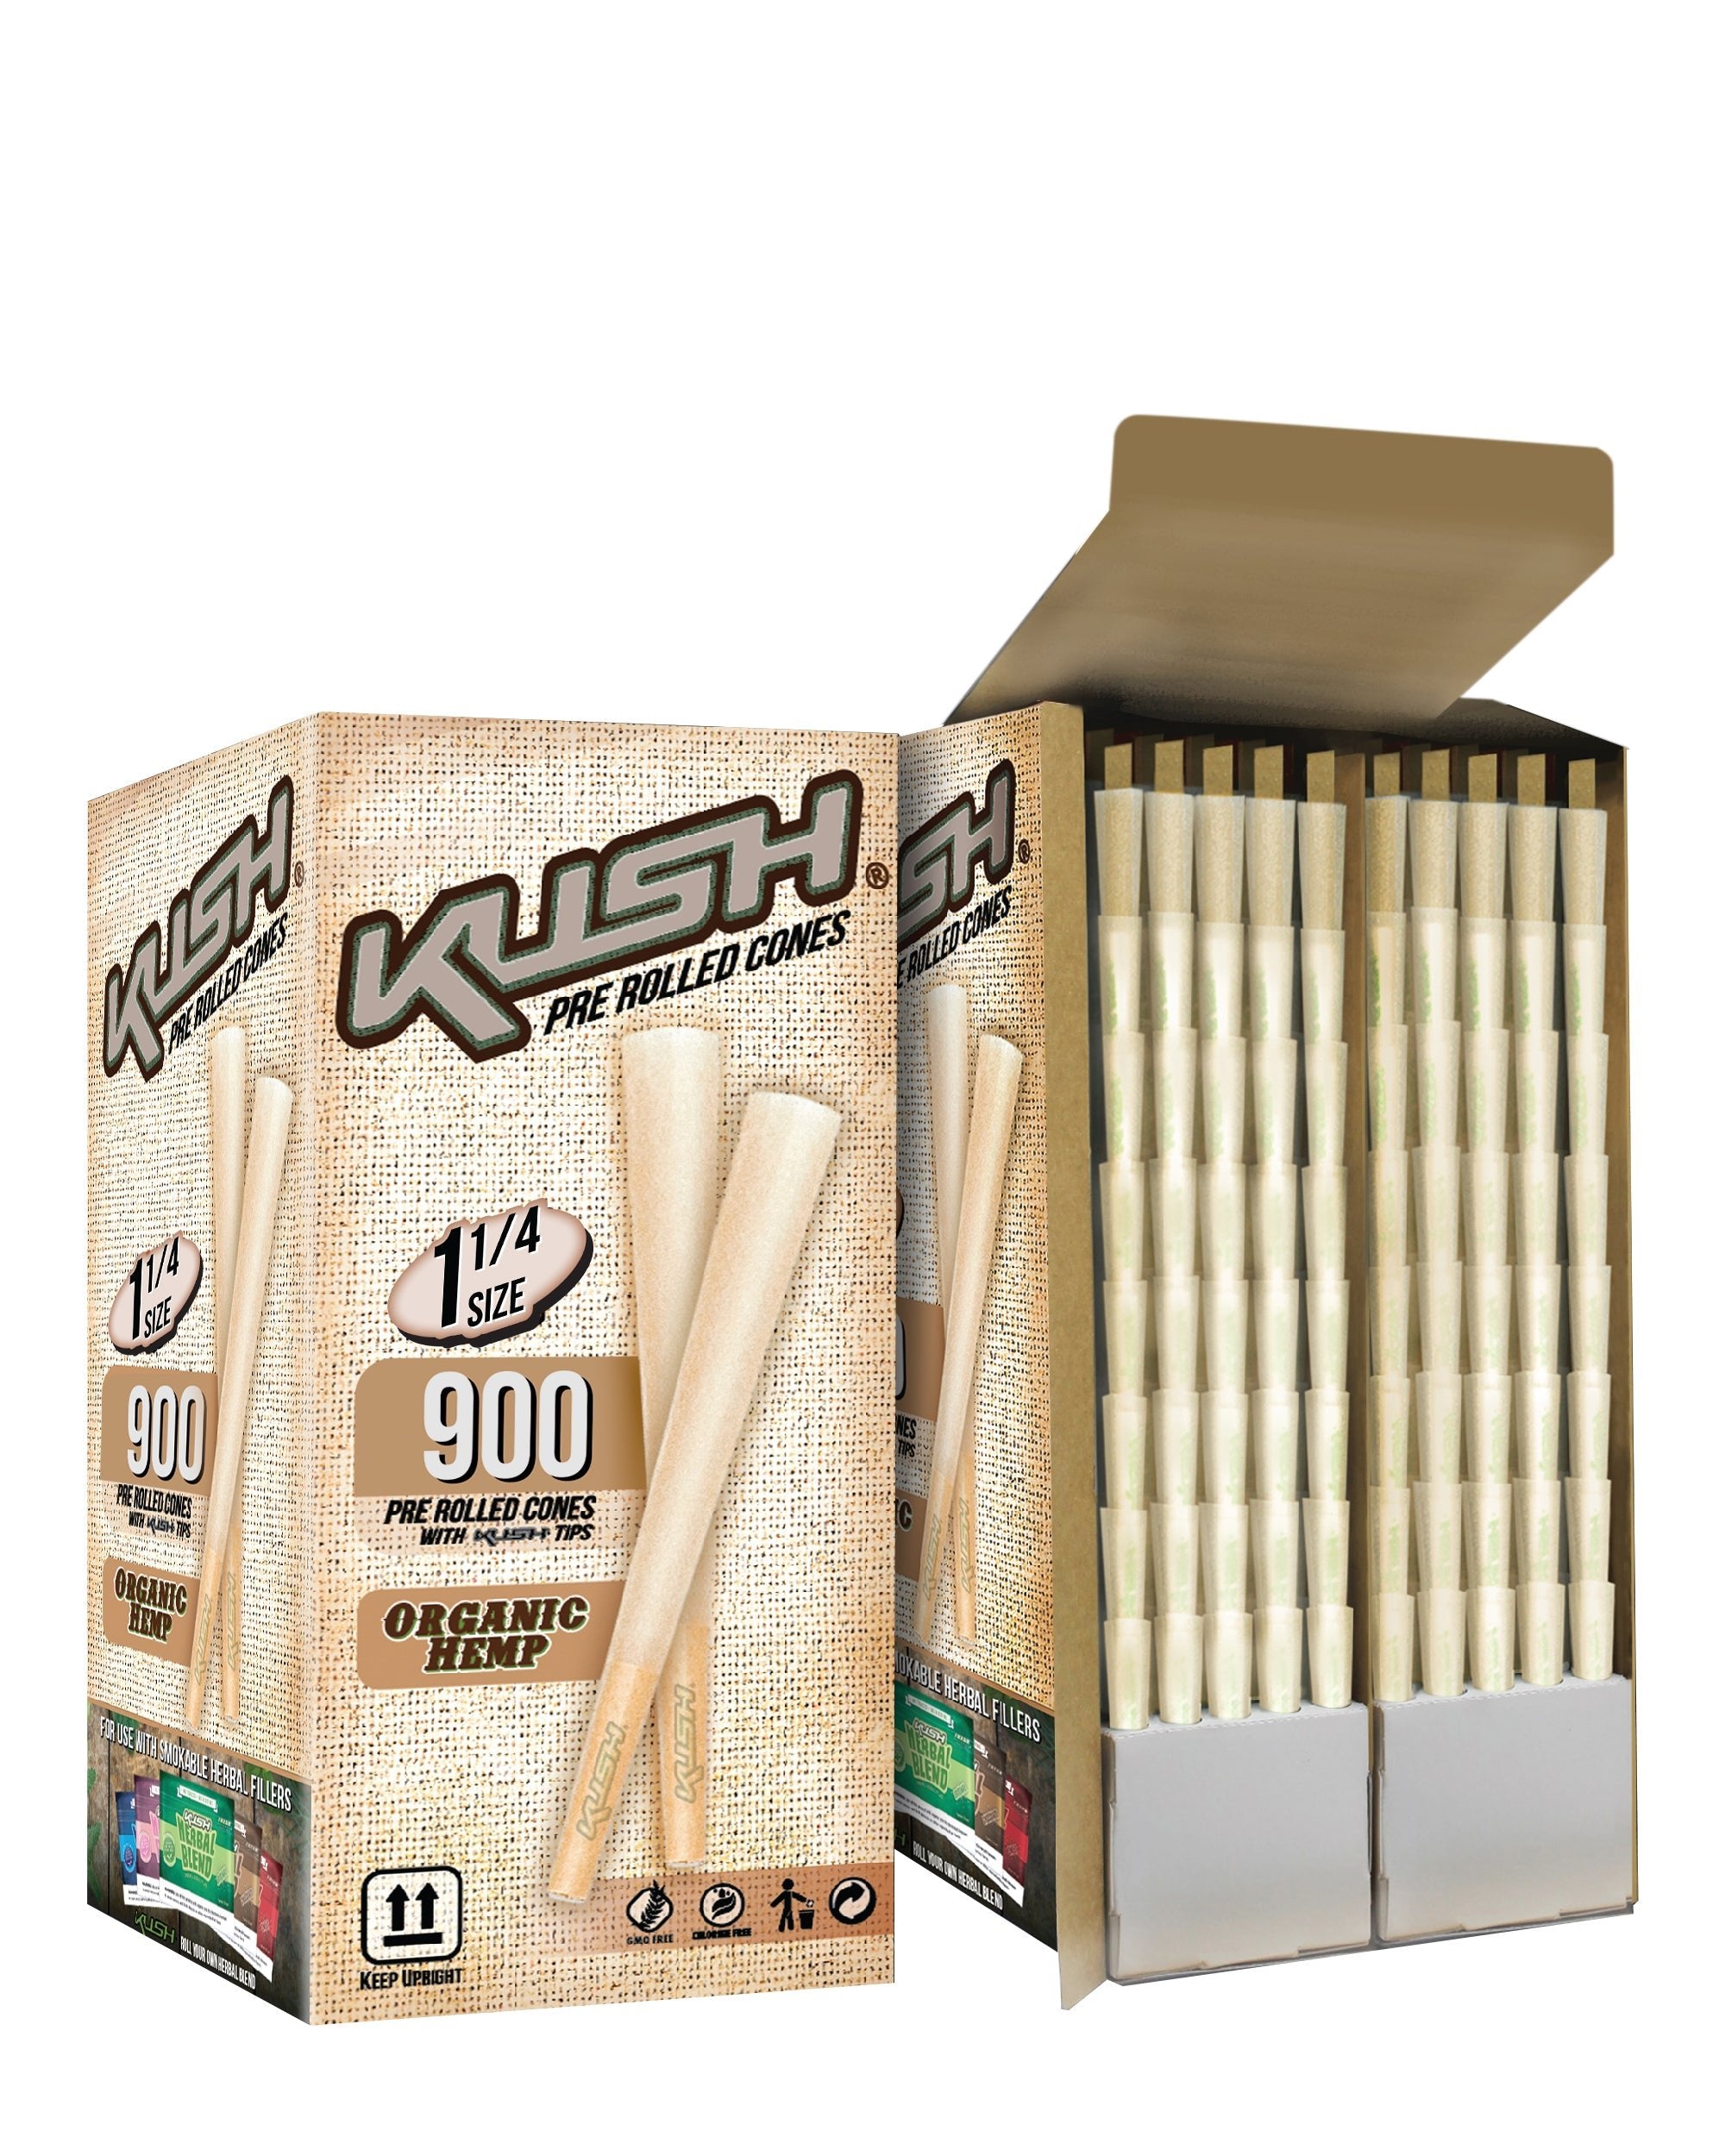 KUSH | Organic 1 1/4 Paper Pre-Rolled Cones w/ Filter Tip | 84mm - Hemp - 900 Count - 2